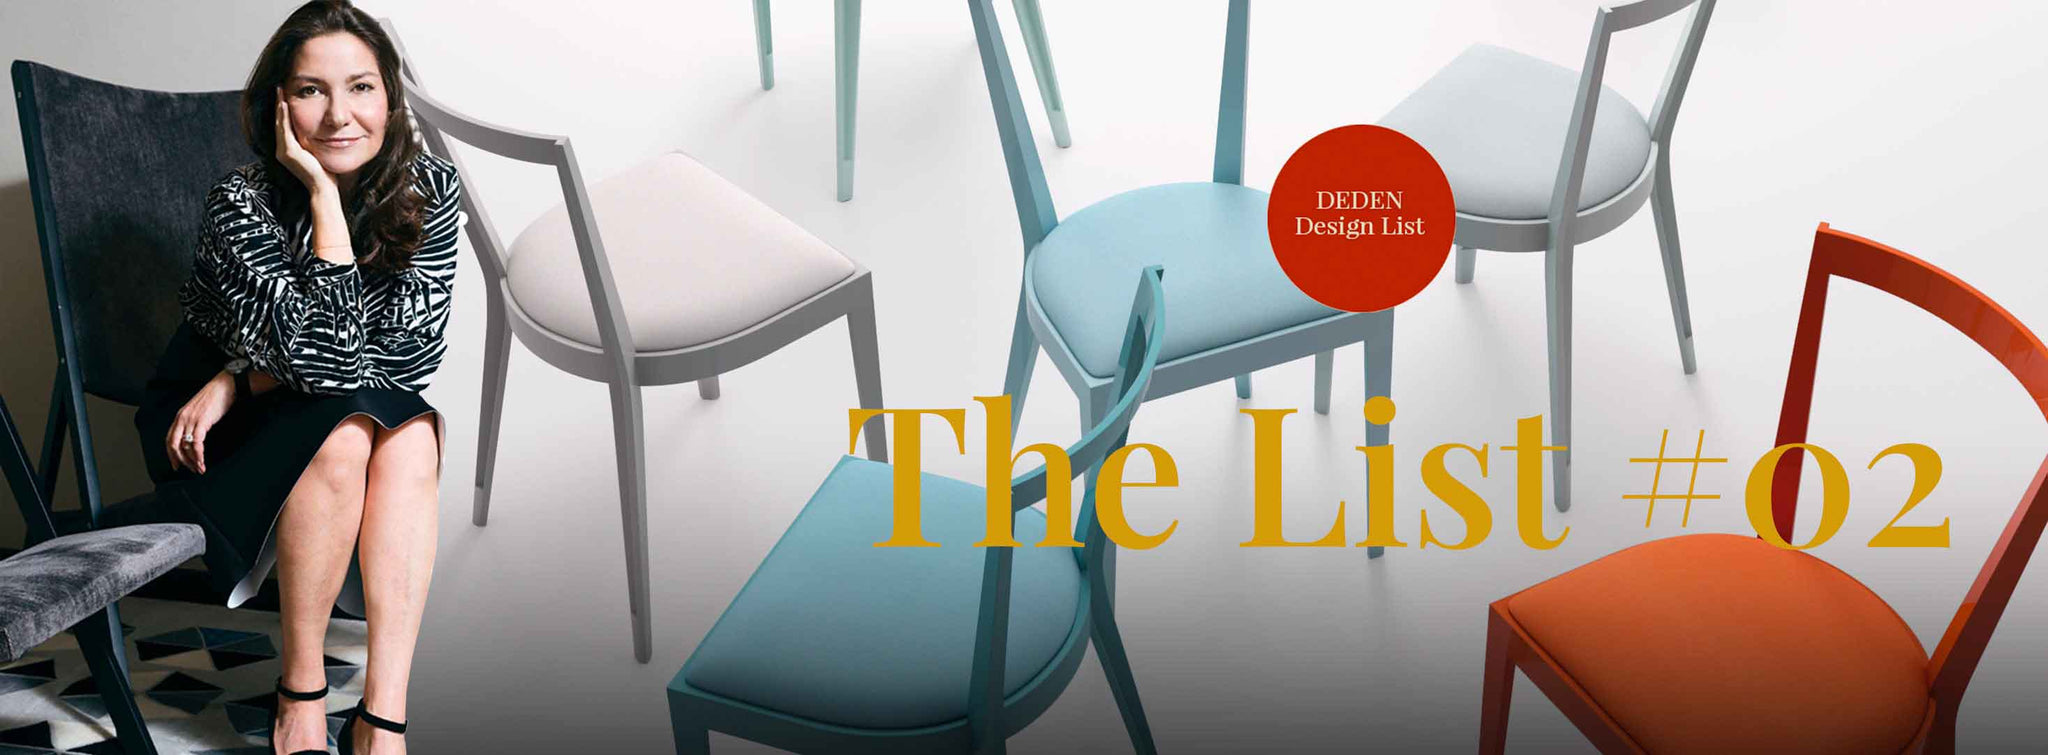 Design meets Material - The List #02 - Design Italy